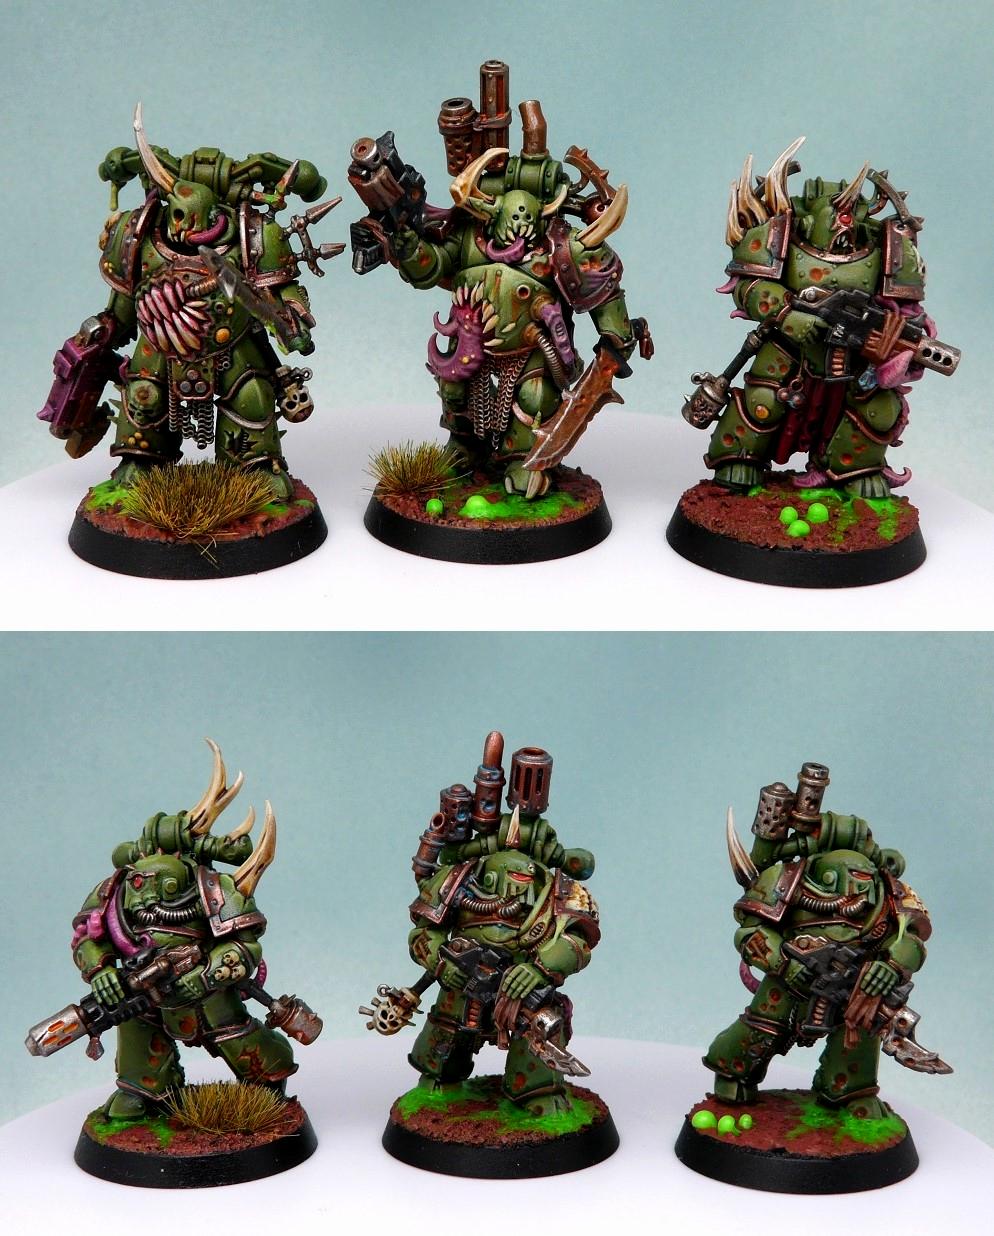 Chaos Space Marines, Death Guard, Hereticus Astartes, Nurgle, Plague Marines